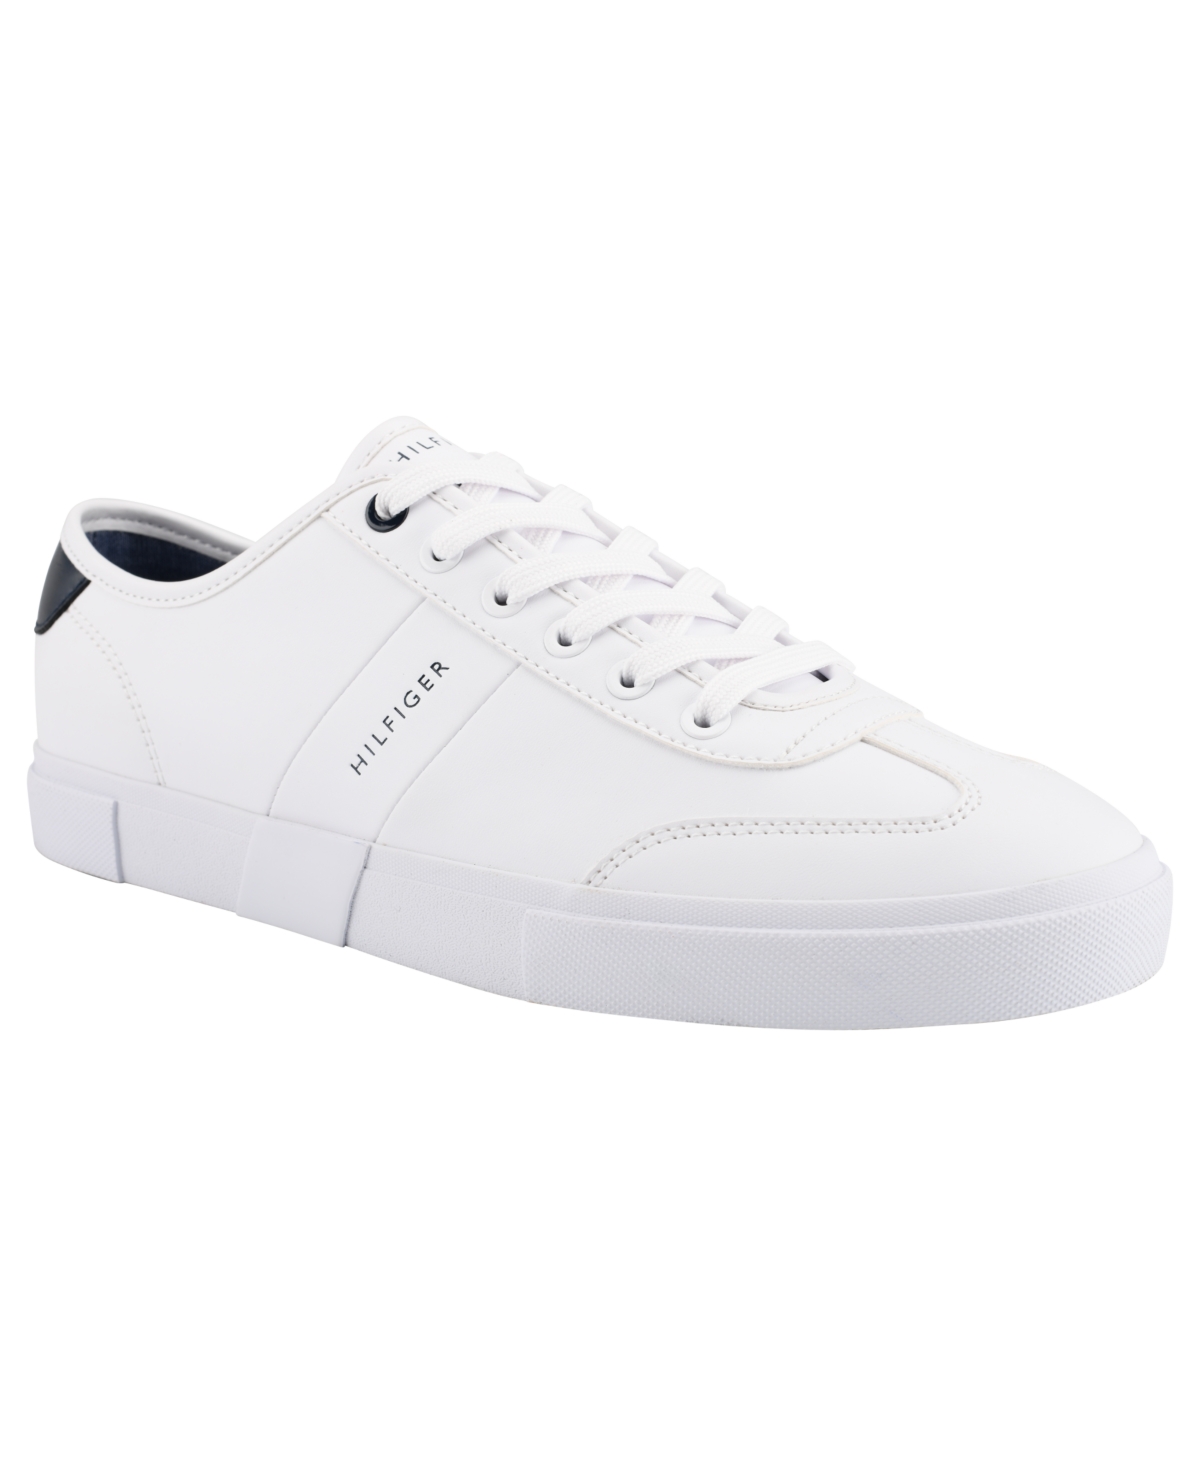 Men's Pandora Lace Up Low Top Sneakers - White, Navy